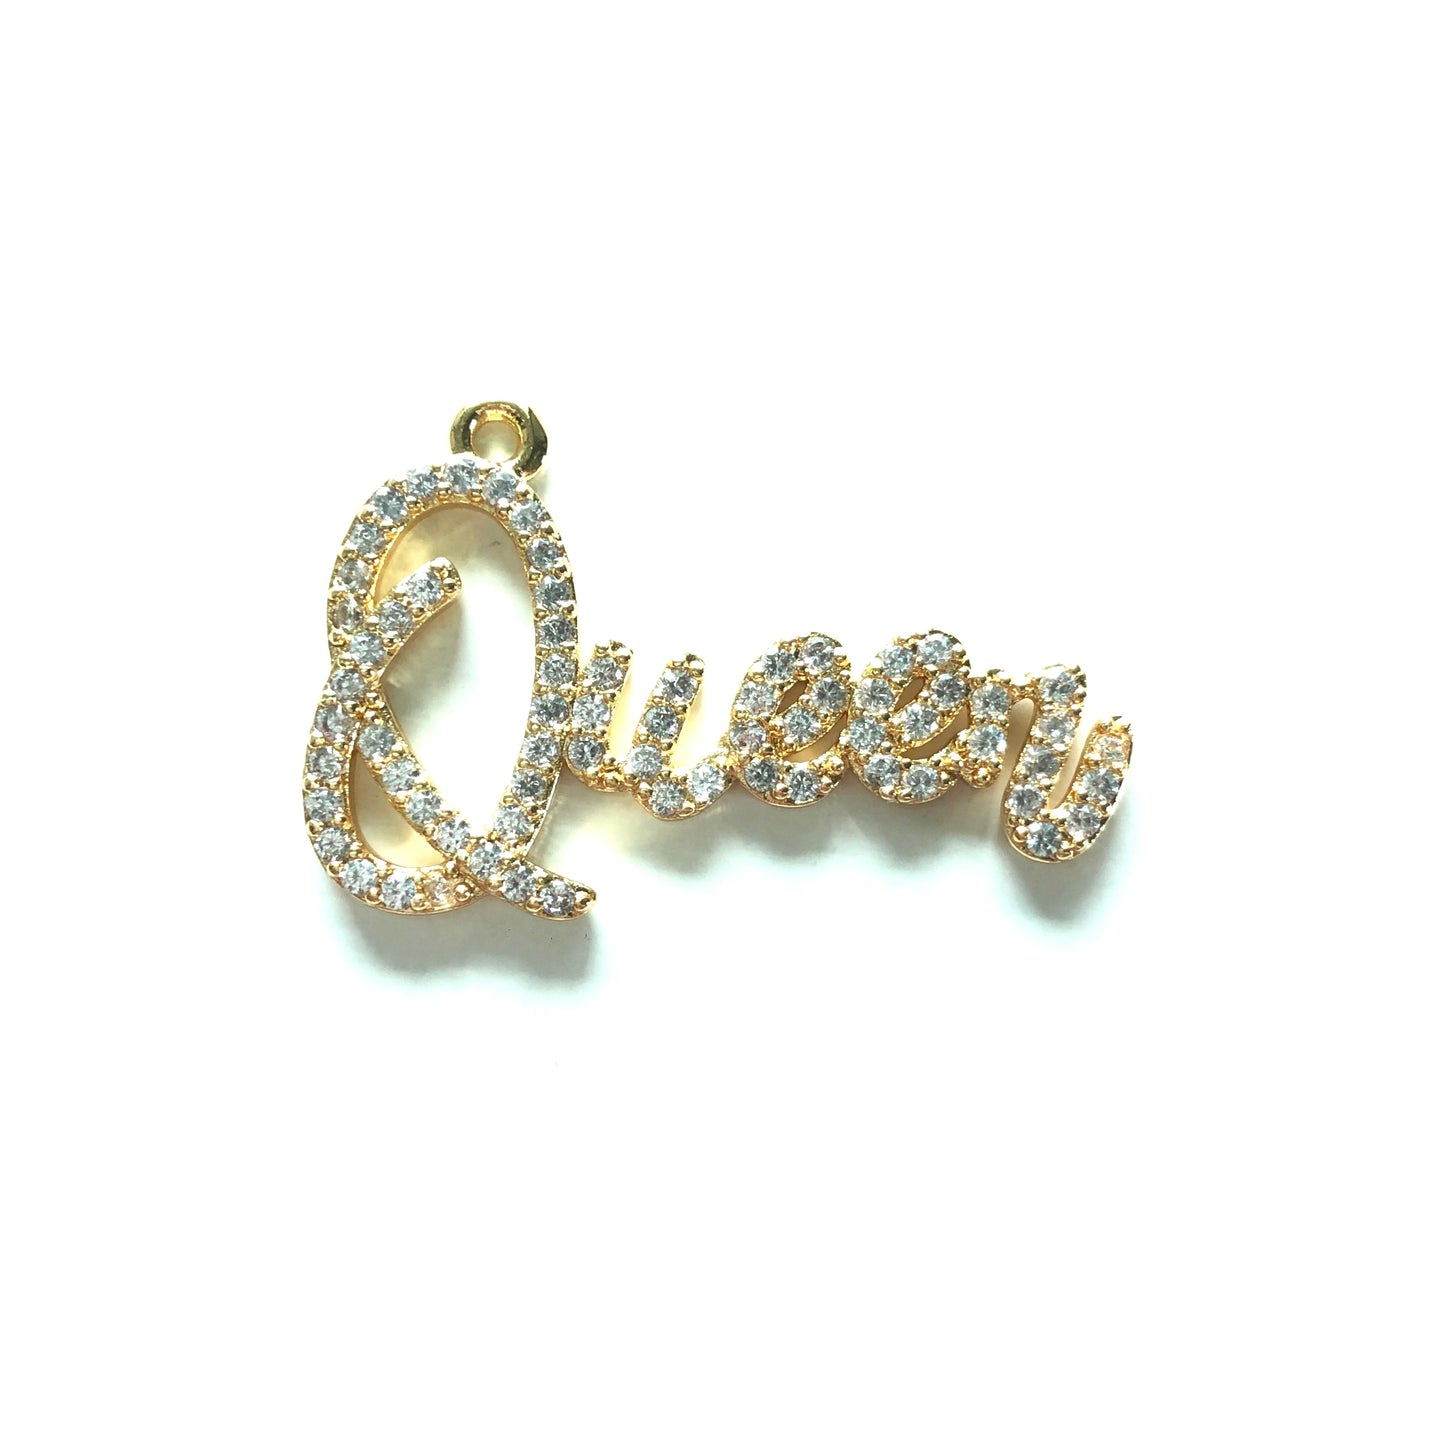 10pcs/lot 34*22.5mm CZ Paved Queen Charms Gold CZ Paved Charms Queen Charms Words & Quotes Charms Beads Beyond